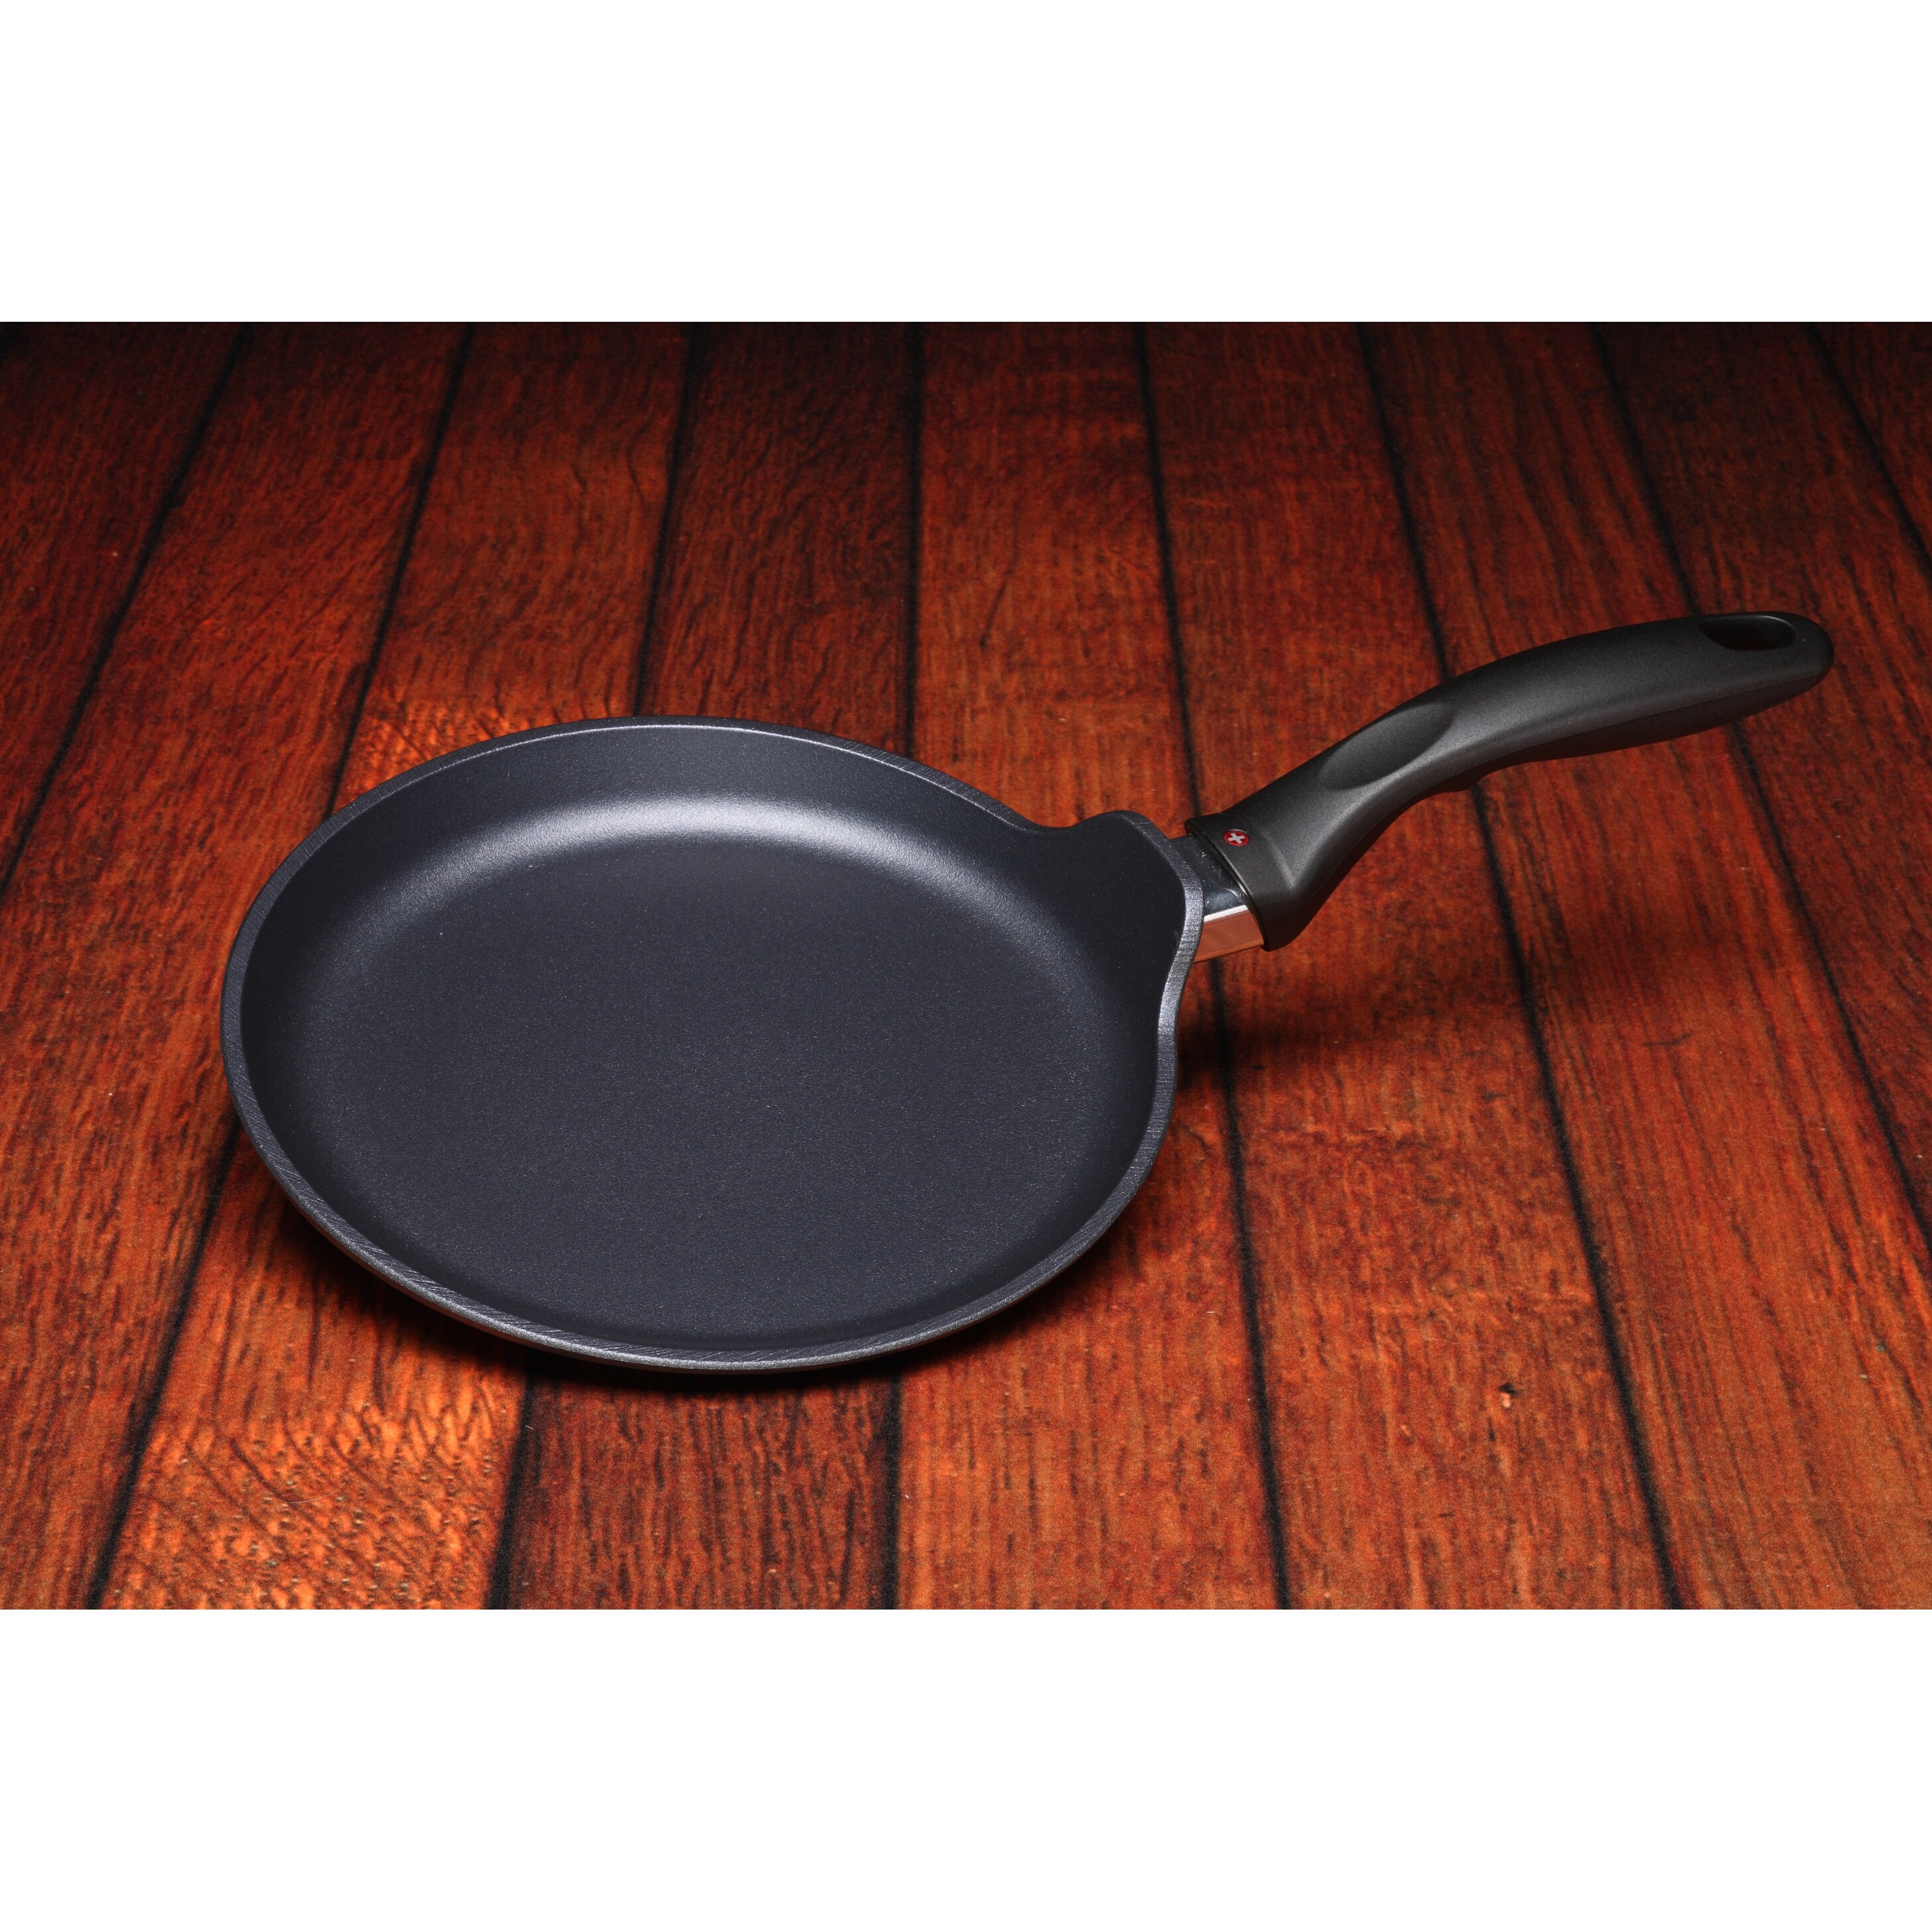 https://ak1.ostkcdn.com/images/products/is/images/direct/c046bf17fbb3f06268d0bbeff0c1451367d1d5fe/HD-Crepe-Pan---9.5%22-%2824-cm%29.jpg